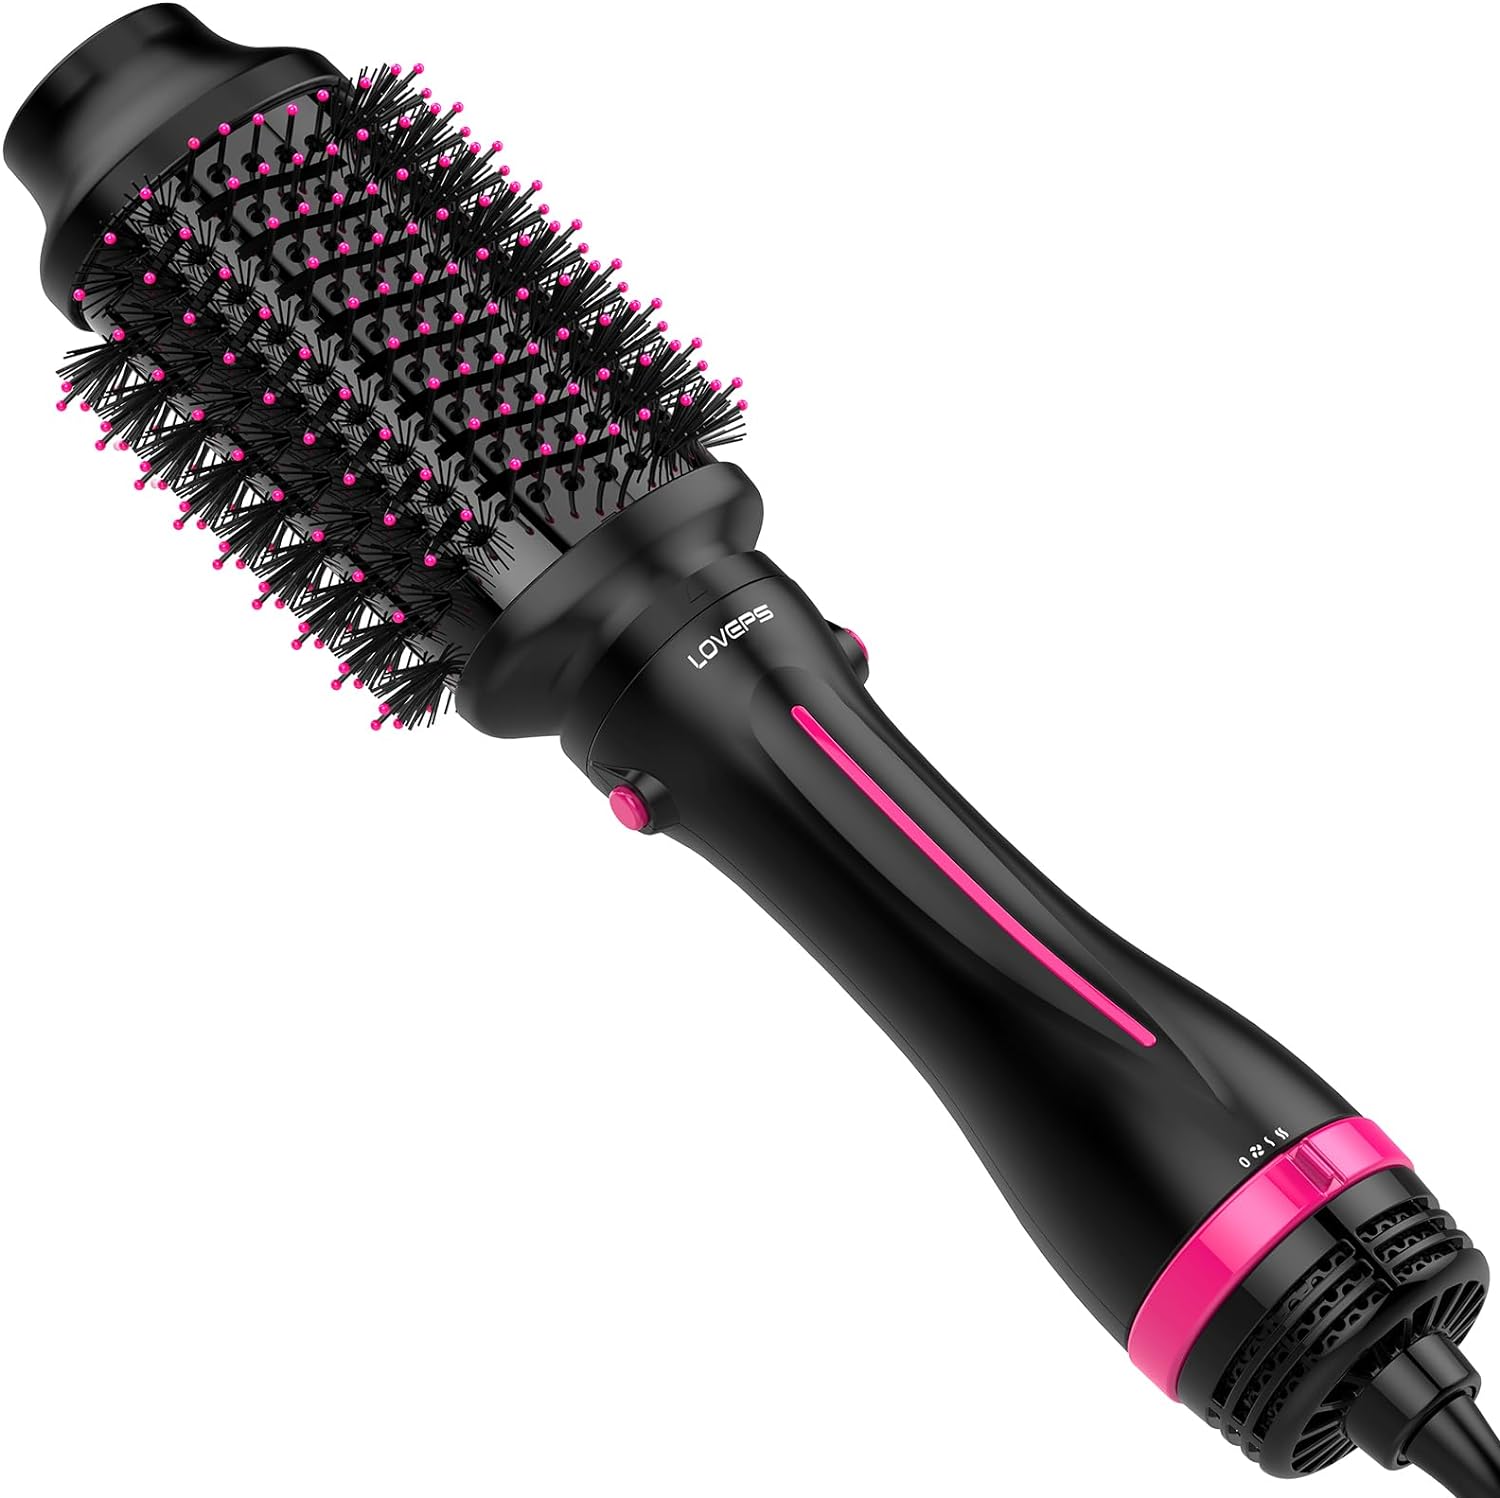 Blow Hair Dryer Brush One-Step Hot Air Brush and Volumizer, Oval Brush for Blow Drying, 4 in 1 Styling Tools for Women, Pink